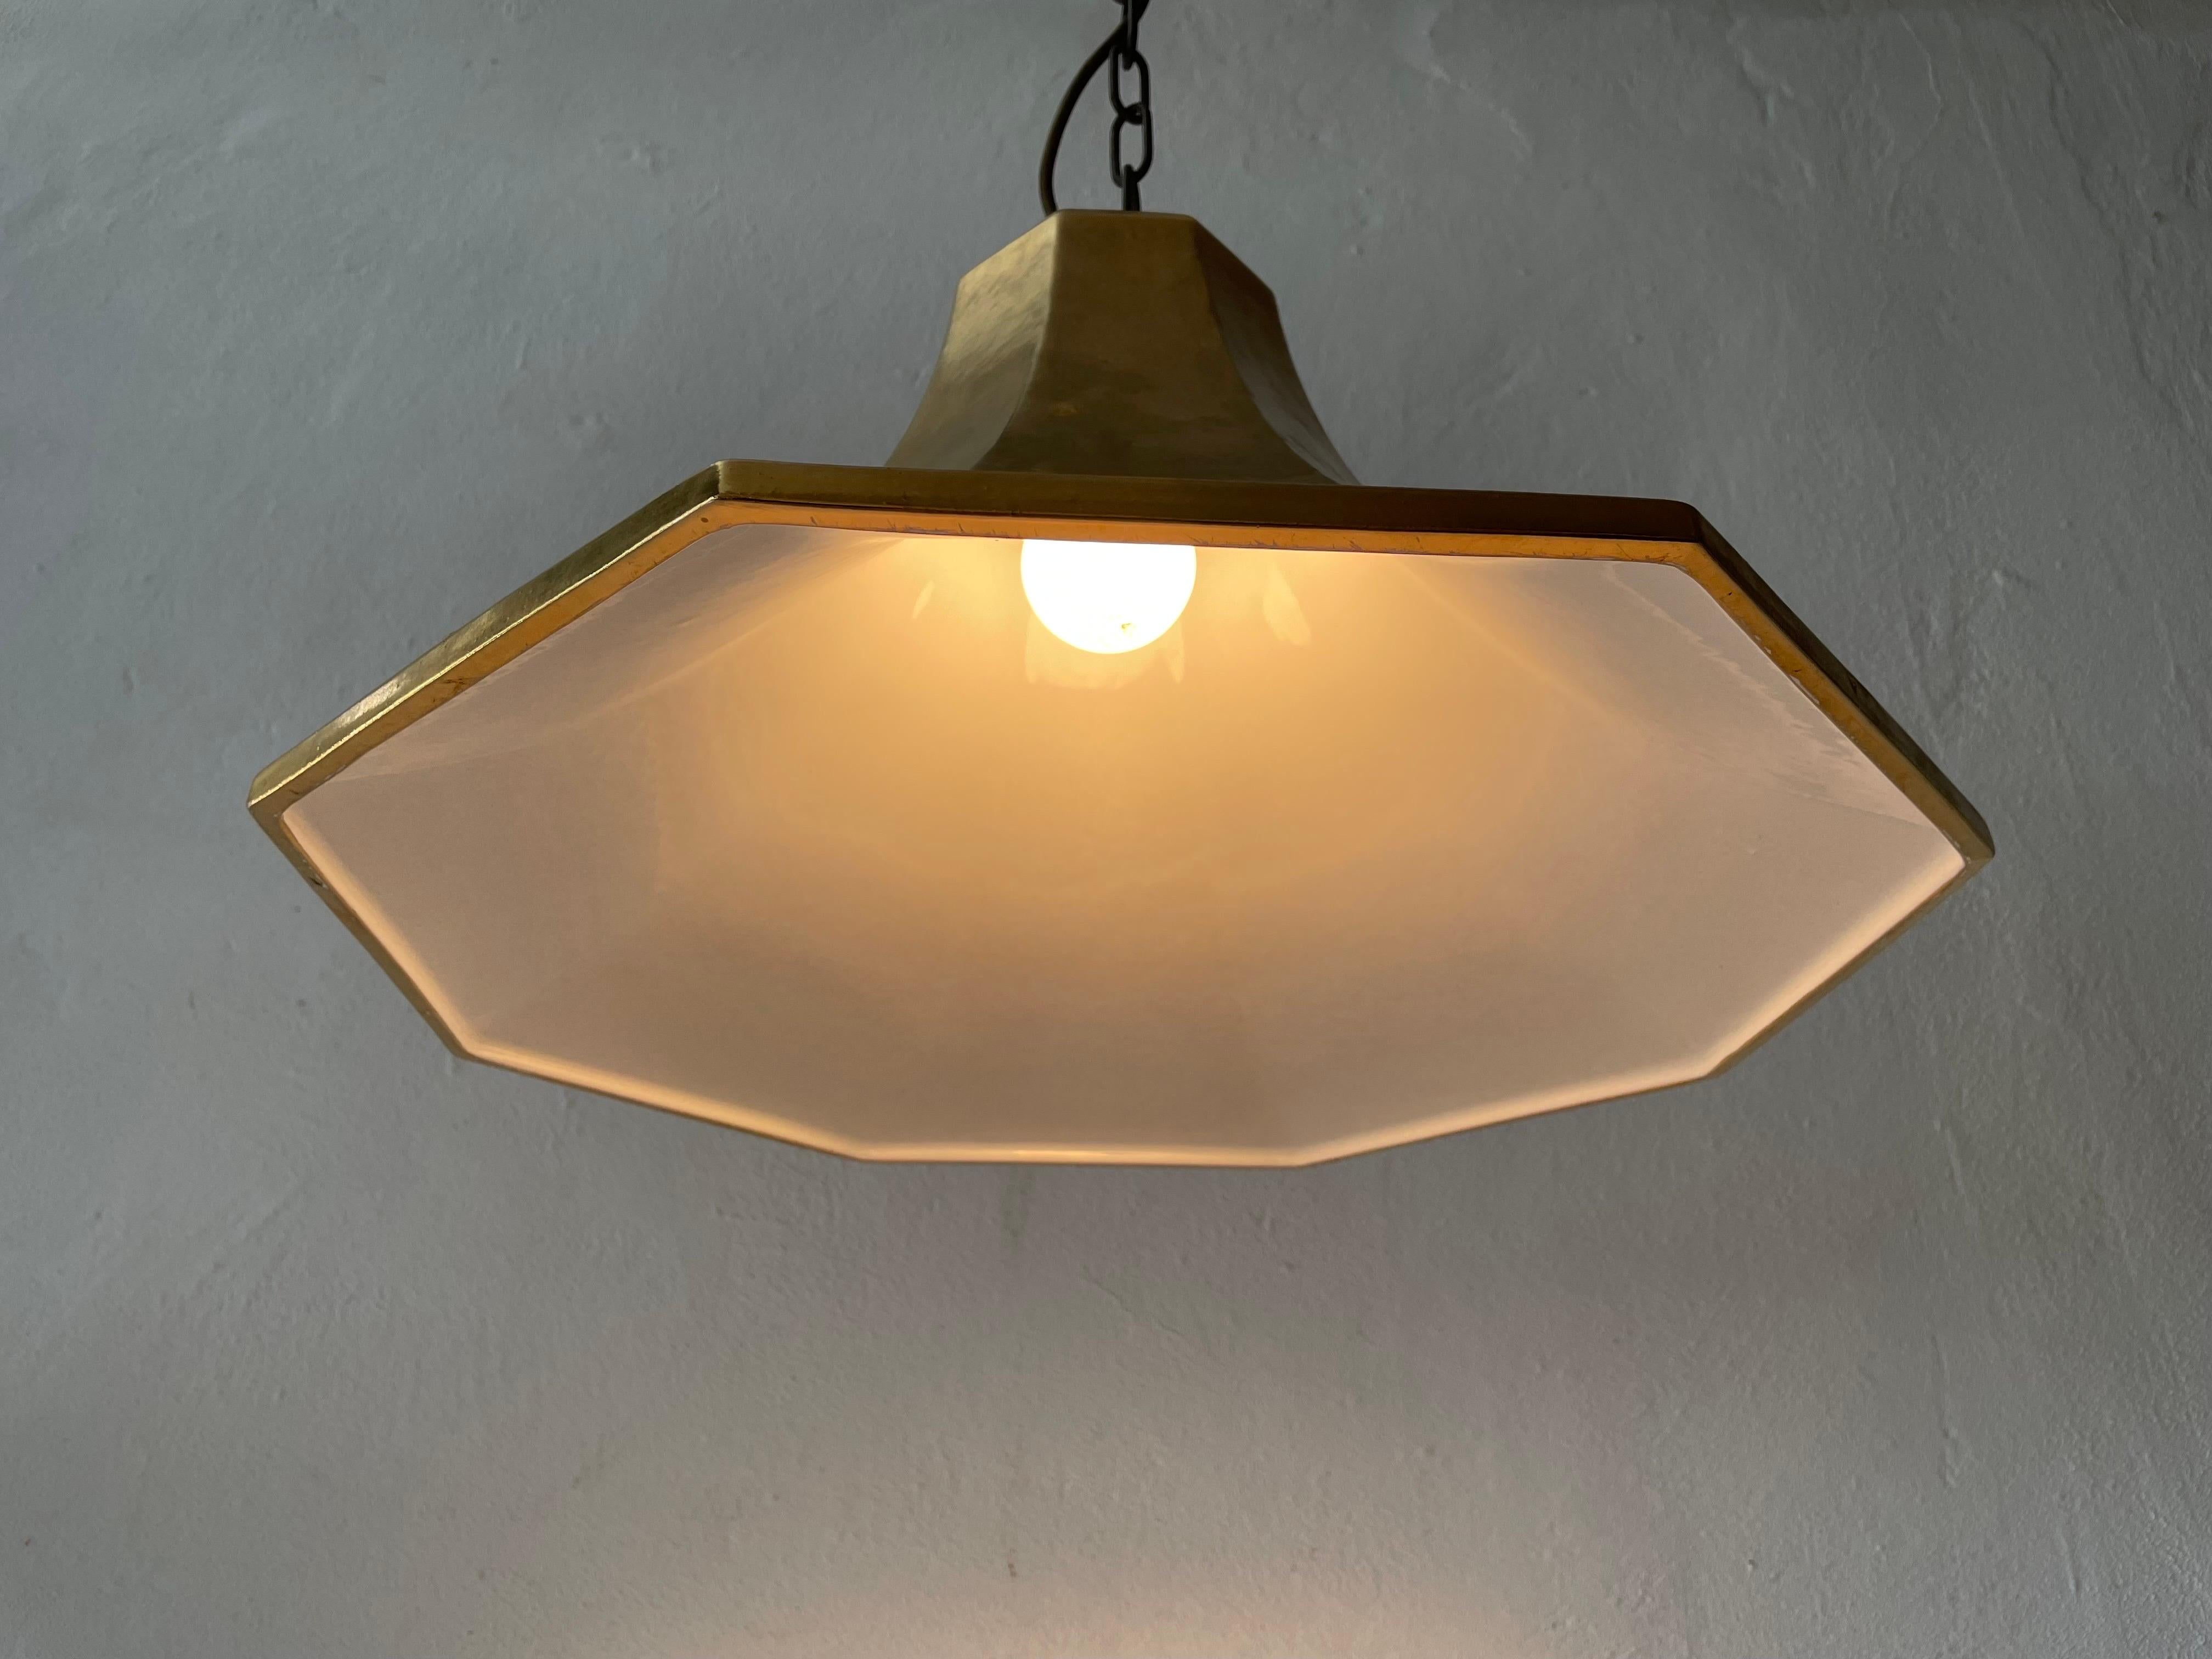 Exclusive Gold Ceramic Pendant Lamp by Licht+Wohnen, Karlsruhe, 1970s, Germany For Sale 5